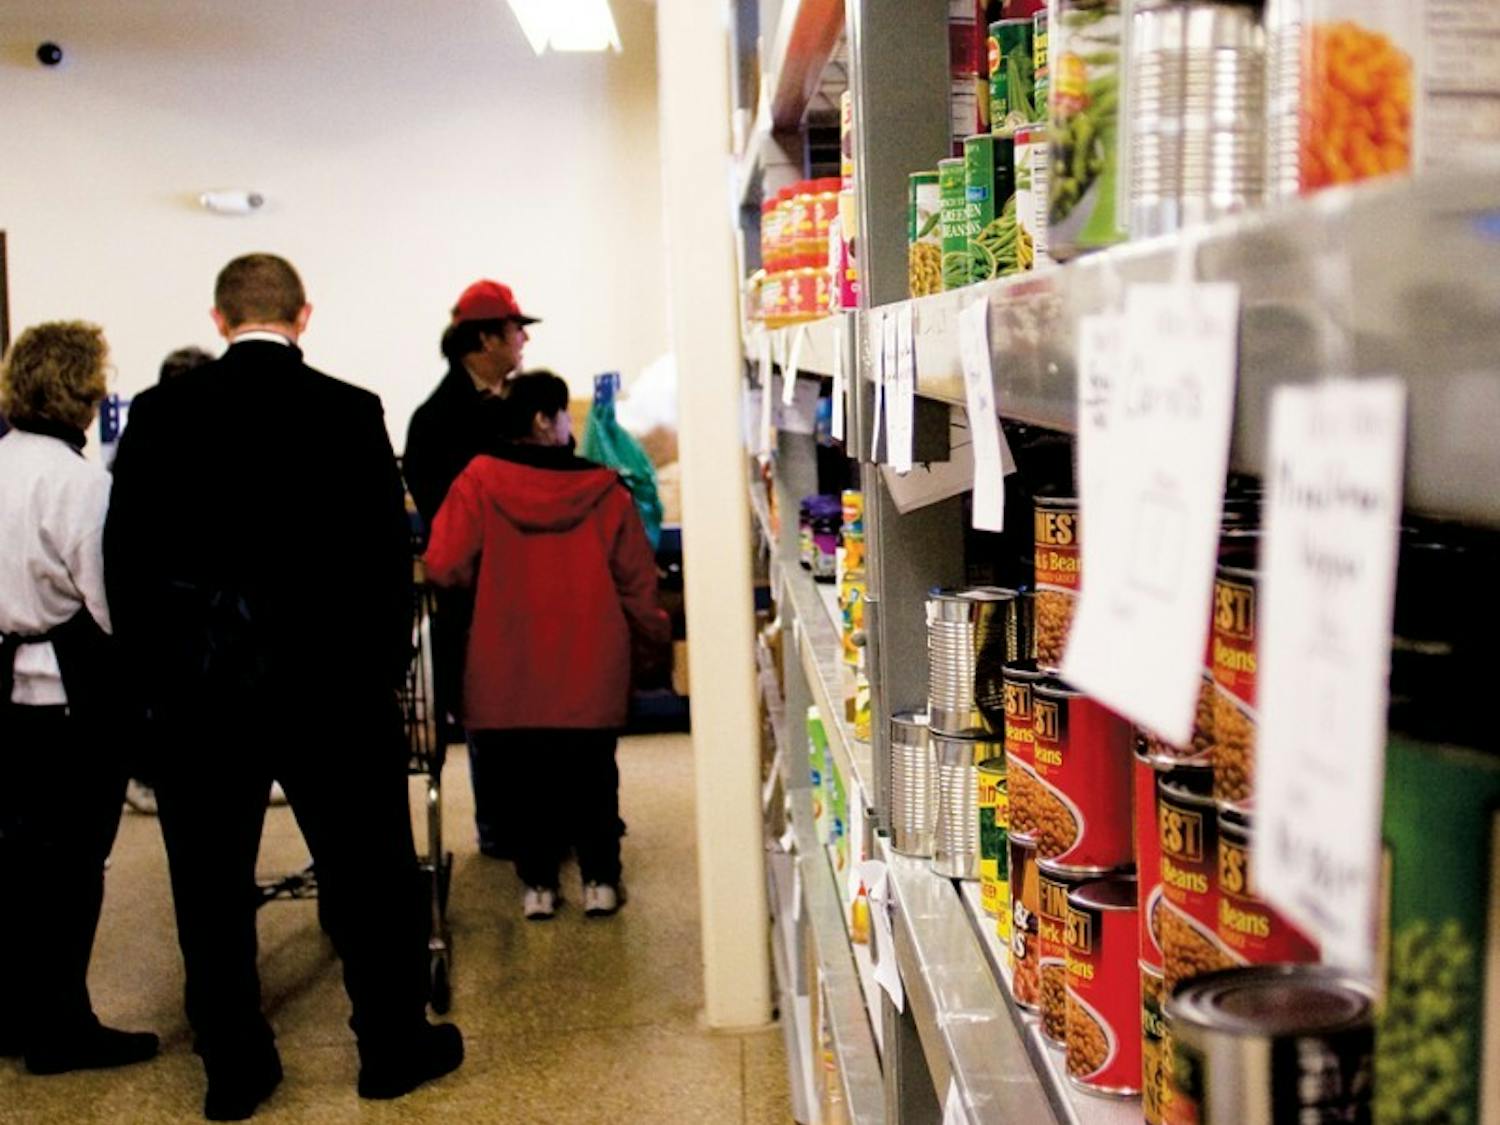 County shelters, pantries strained by recession